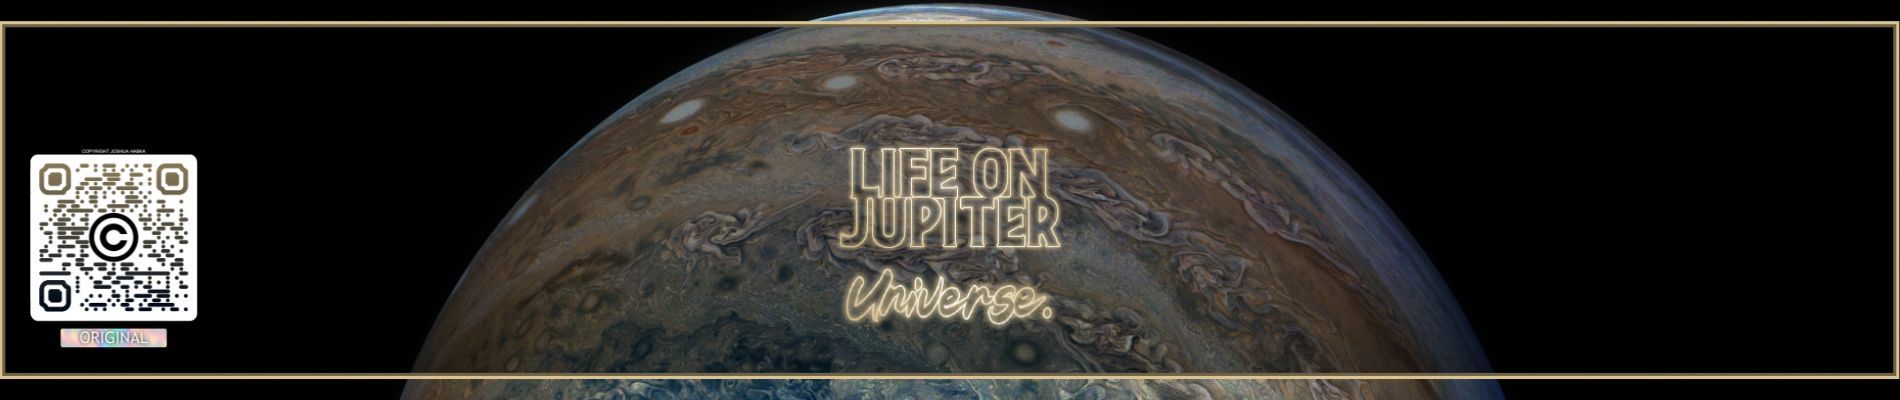 Is There Life on Jupiter?